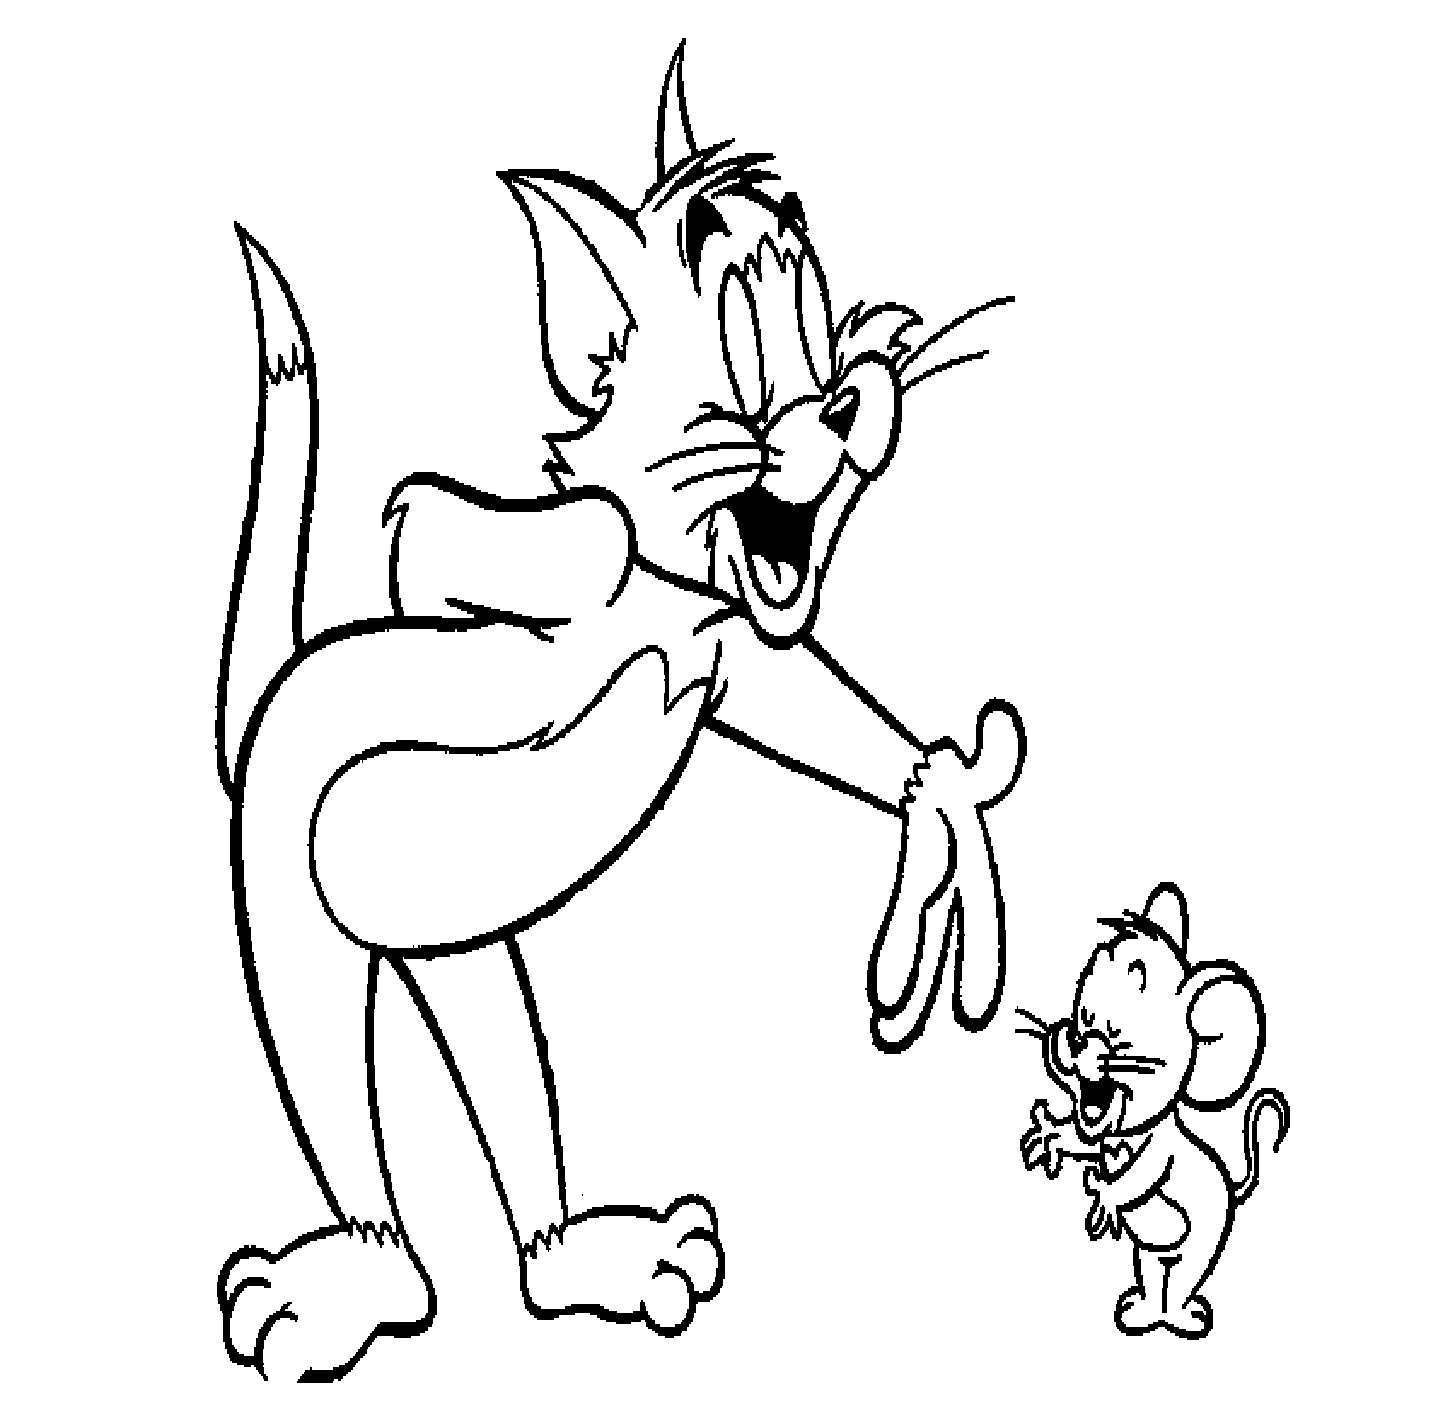 Drawing Tom and Jerry #24230 (Cartoons) – Printable coloring pages